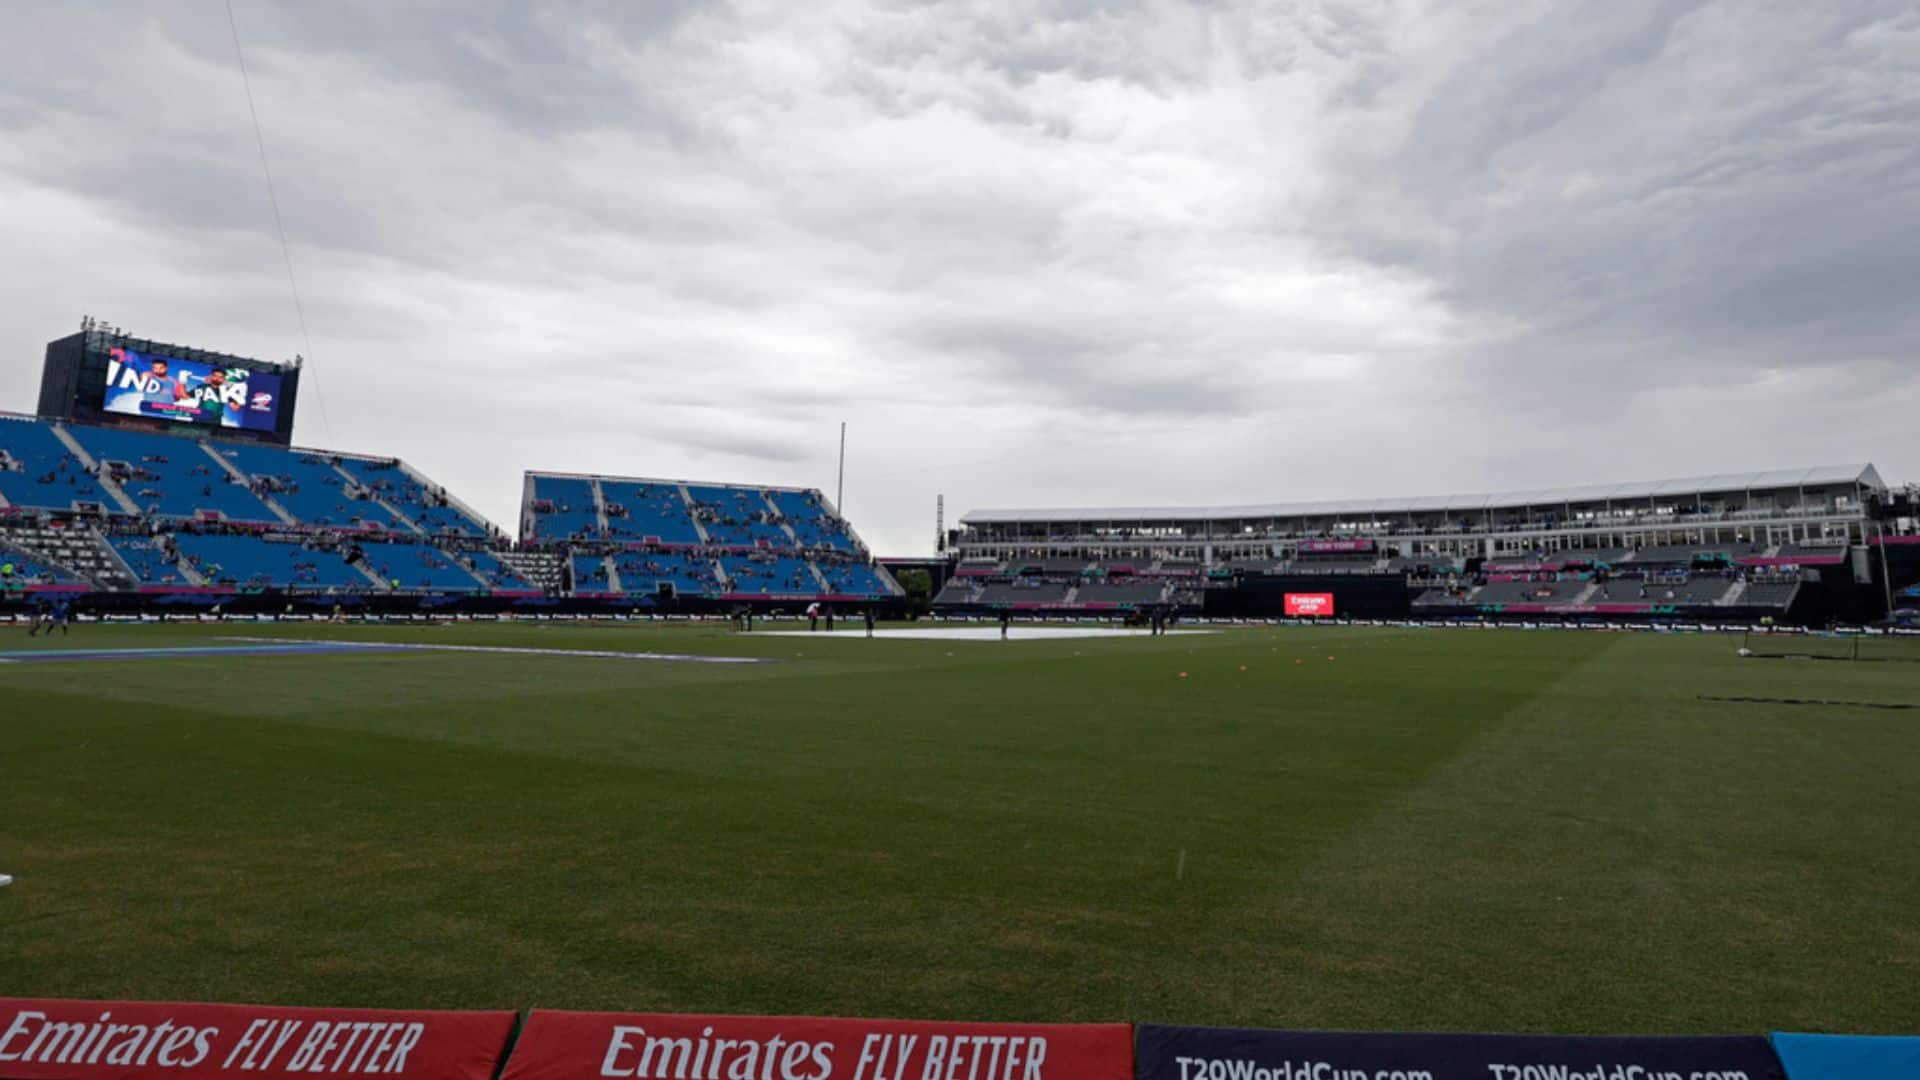 It might rain in New York during PAK vs CAN [AP]